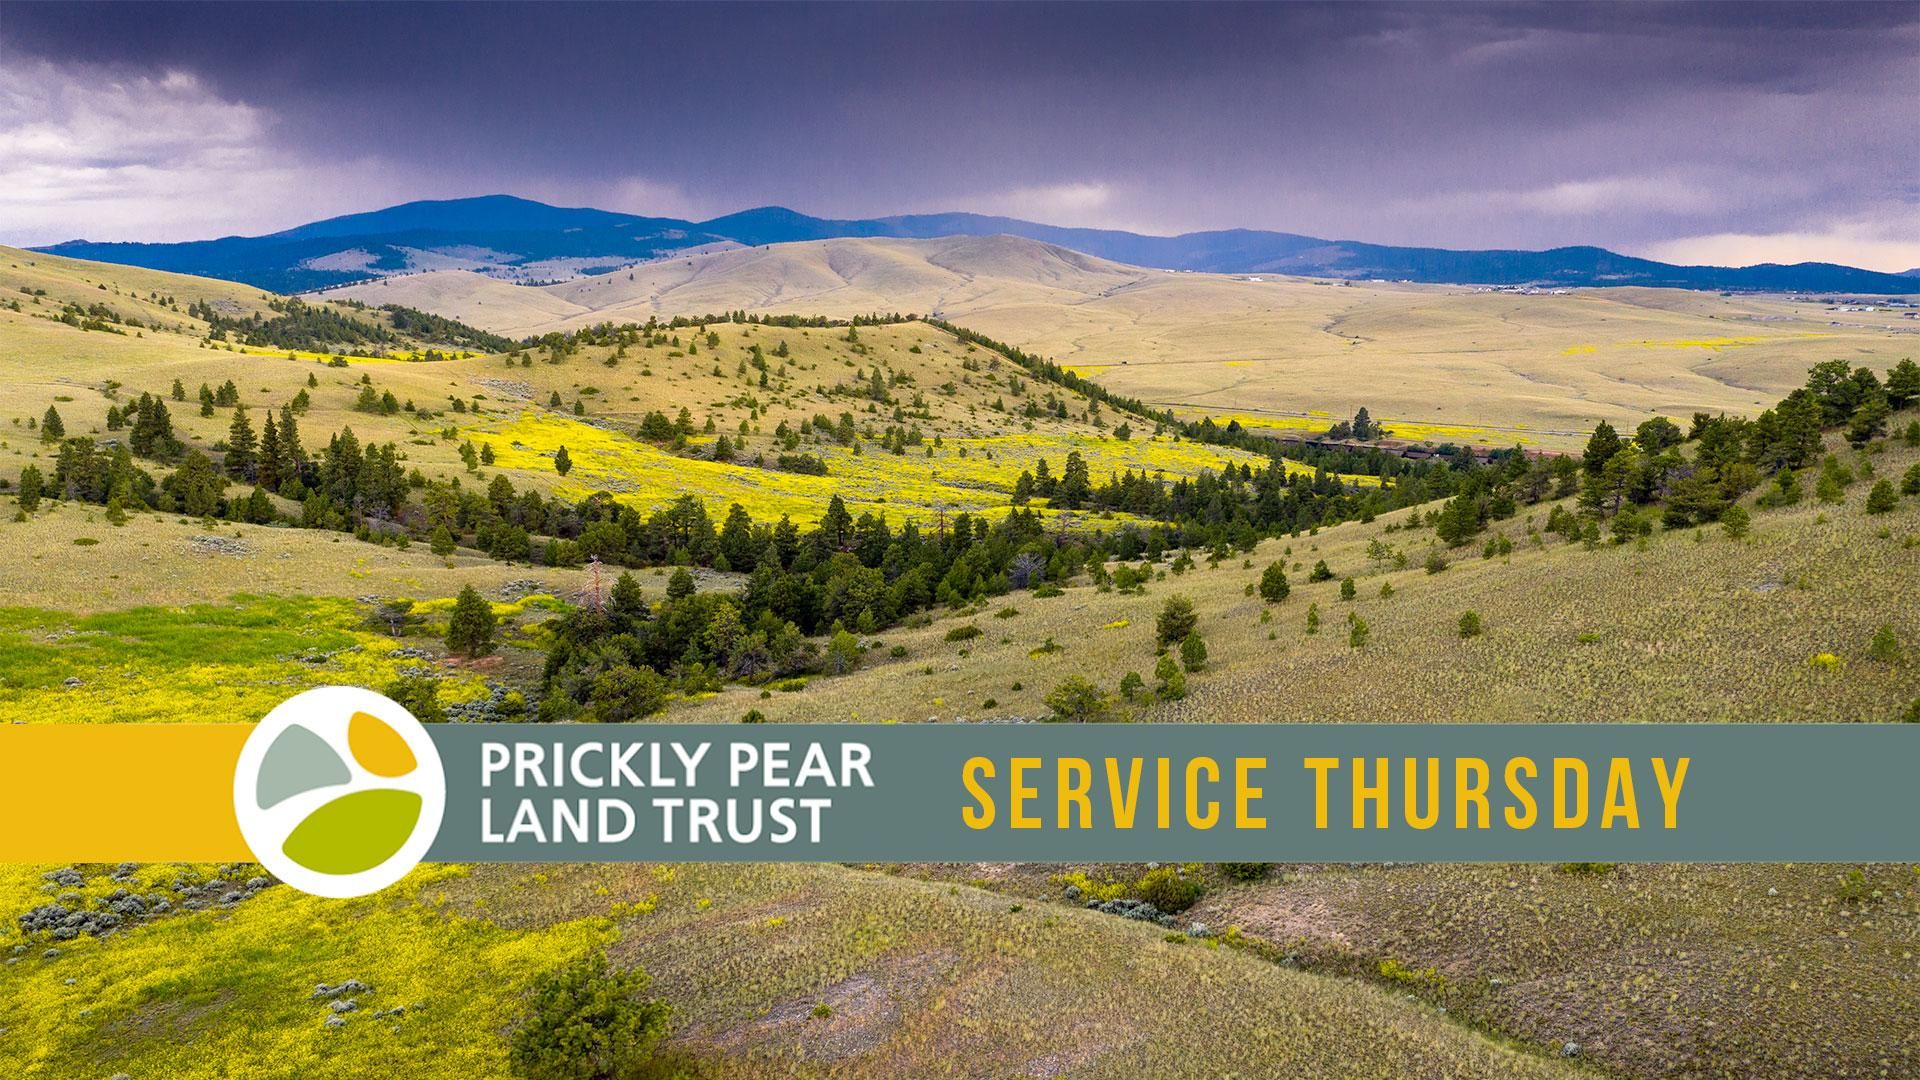 Prickly Pear Land Trust Service Thursday